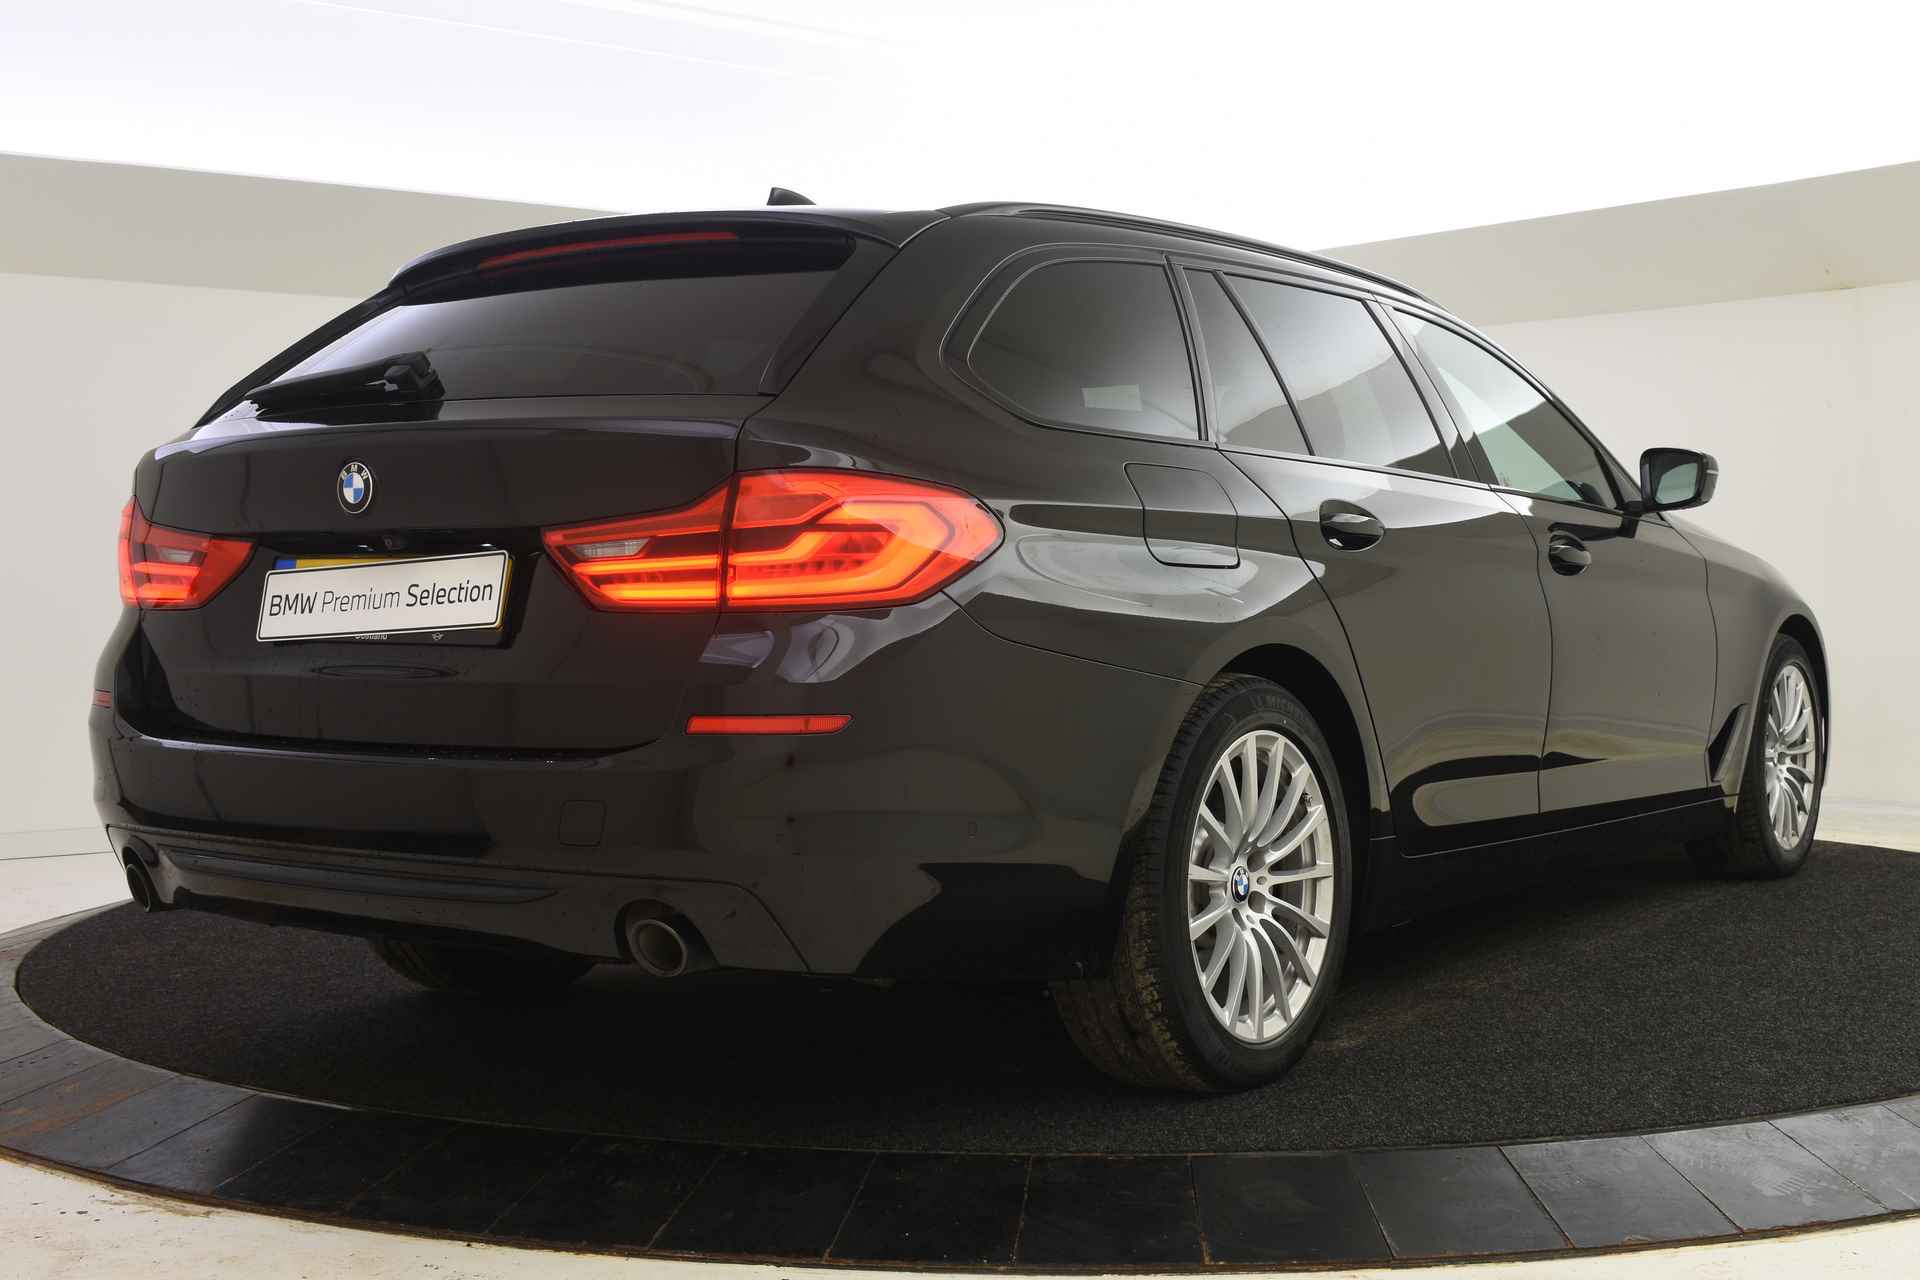 BMW 5 Serie Touring 520i High Executive Sport Line Shadow Line / Adaptieve LED / Active Cruise Control / Stoelventilatie / Head-Up / Parking Assistant / Navigatie Professional - 3/41